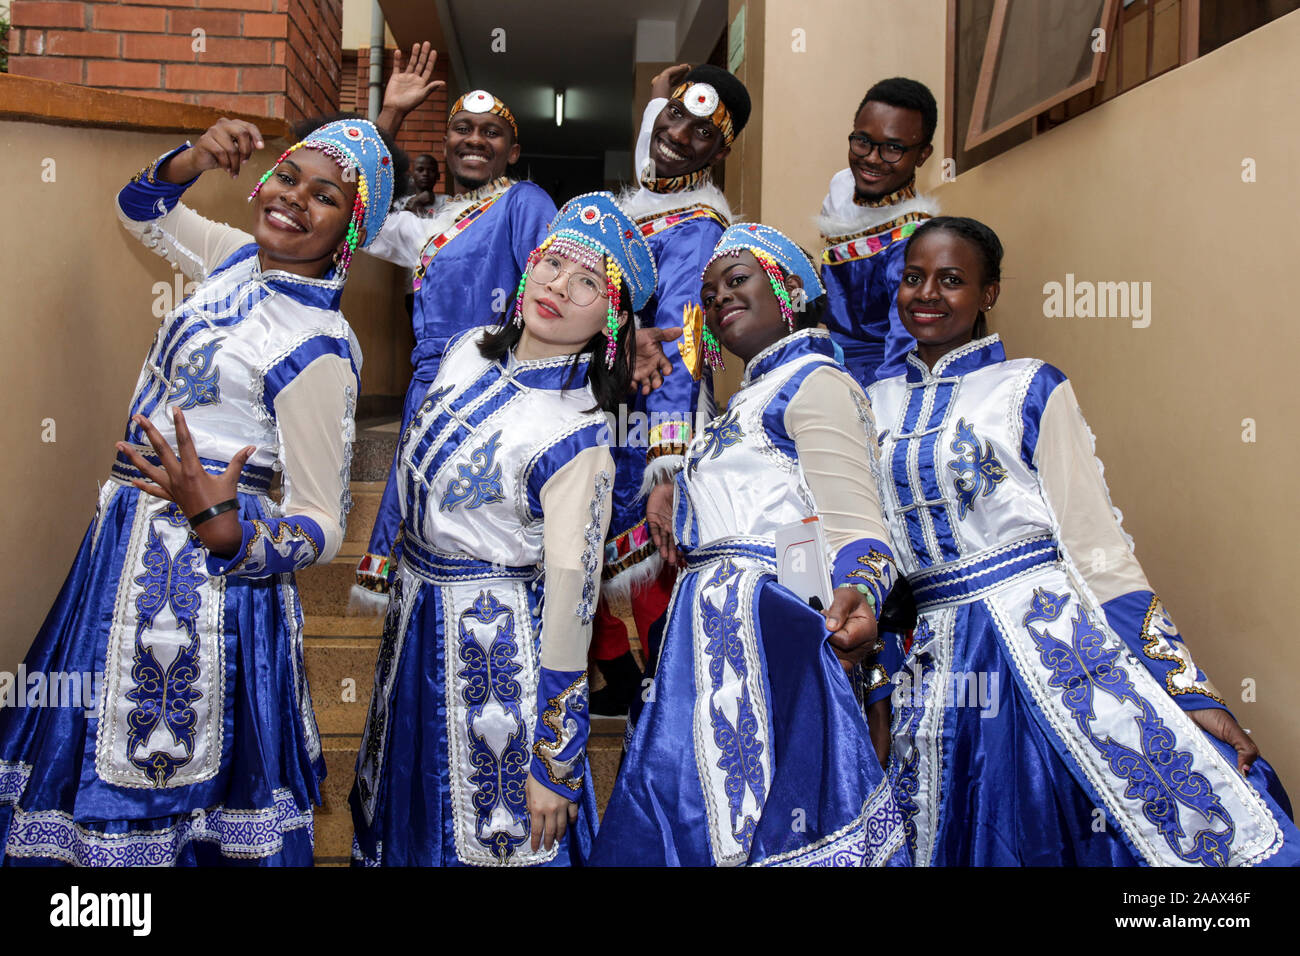 Kampala, Uganda. 23rd Nov, 2019. Students of the Confucius Institute at Makerere University pose for a group photo after performing at an event celebrating the 5th anniversary of the founding of the institute, in Kampala, Uganda, Nov. 23, 2019. Confucius Institute at Makerere University, Uganda's top university, on Saturday celebrated its fifth anniversary. The institution, as the nexus of Chinese language teaching, is playing a major role for cultural exchange between Uganda and China. Credit: Hajarah Nalwadda/Xinhua/Alamy Live News Stock Photo